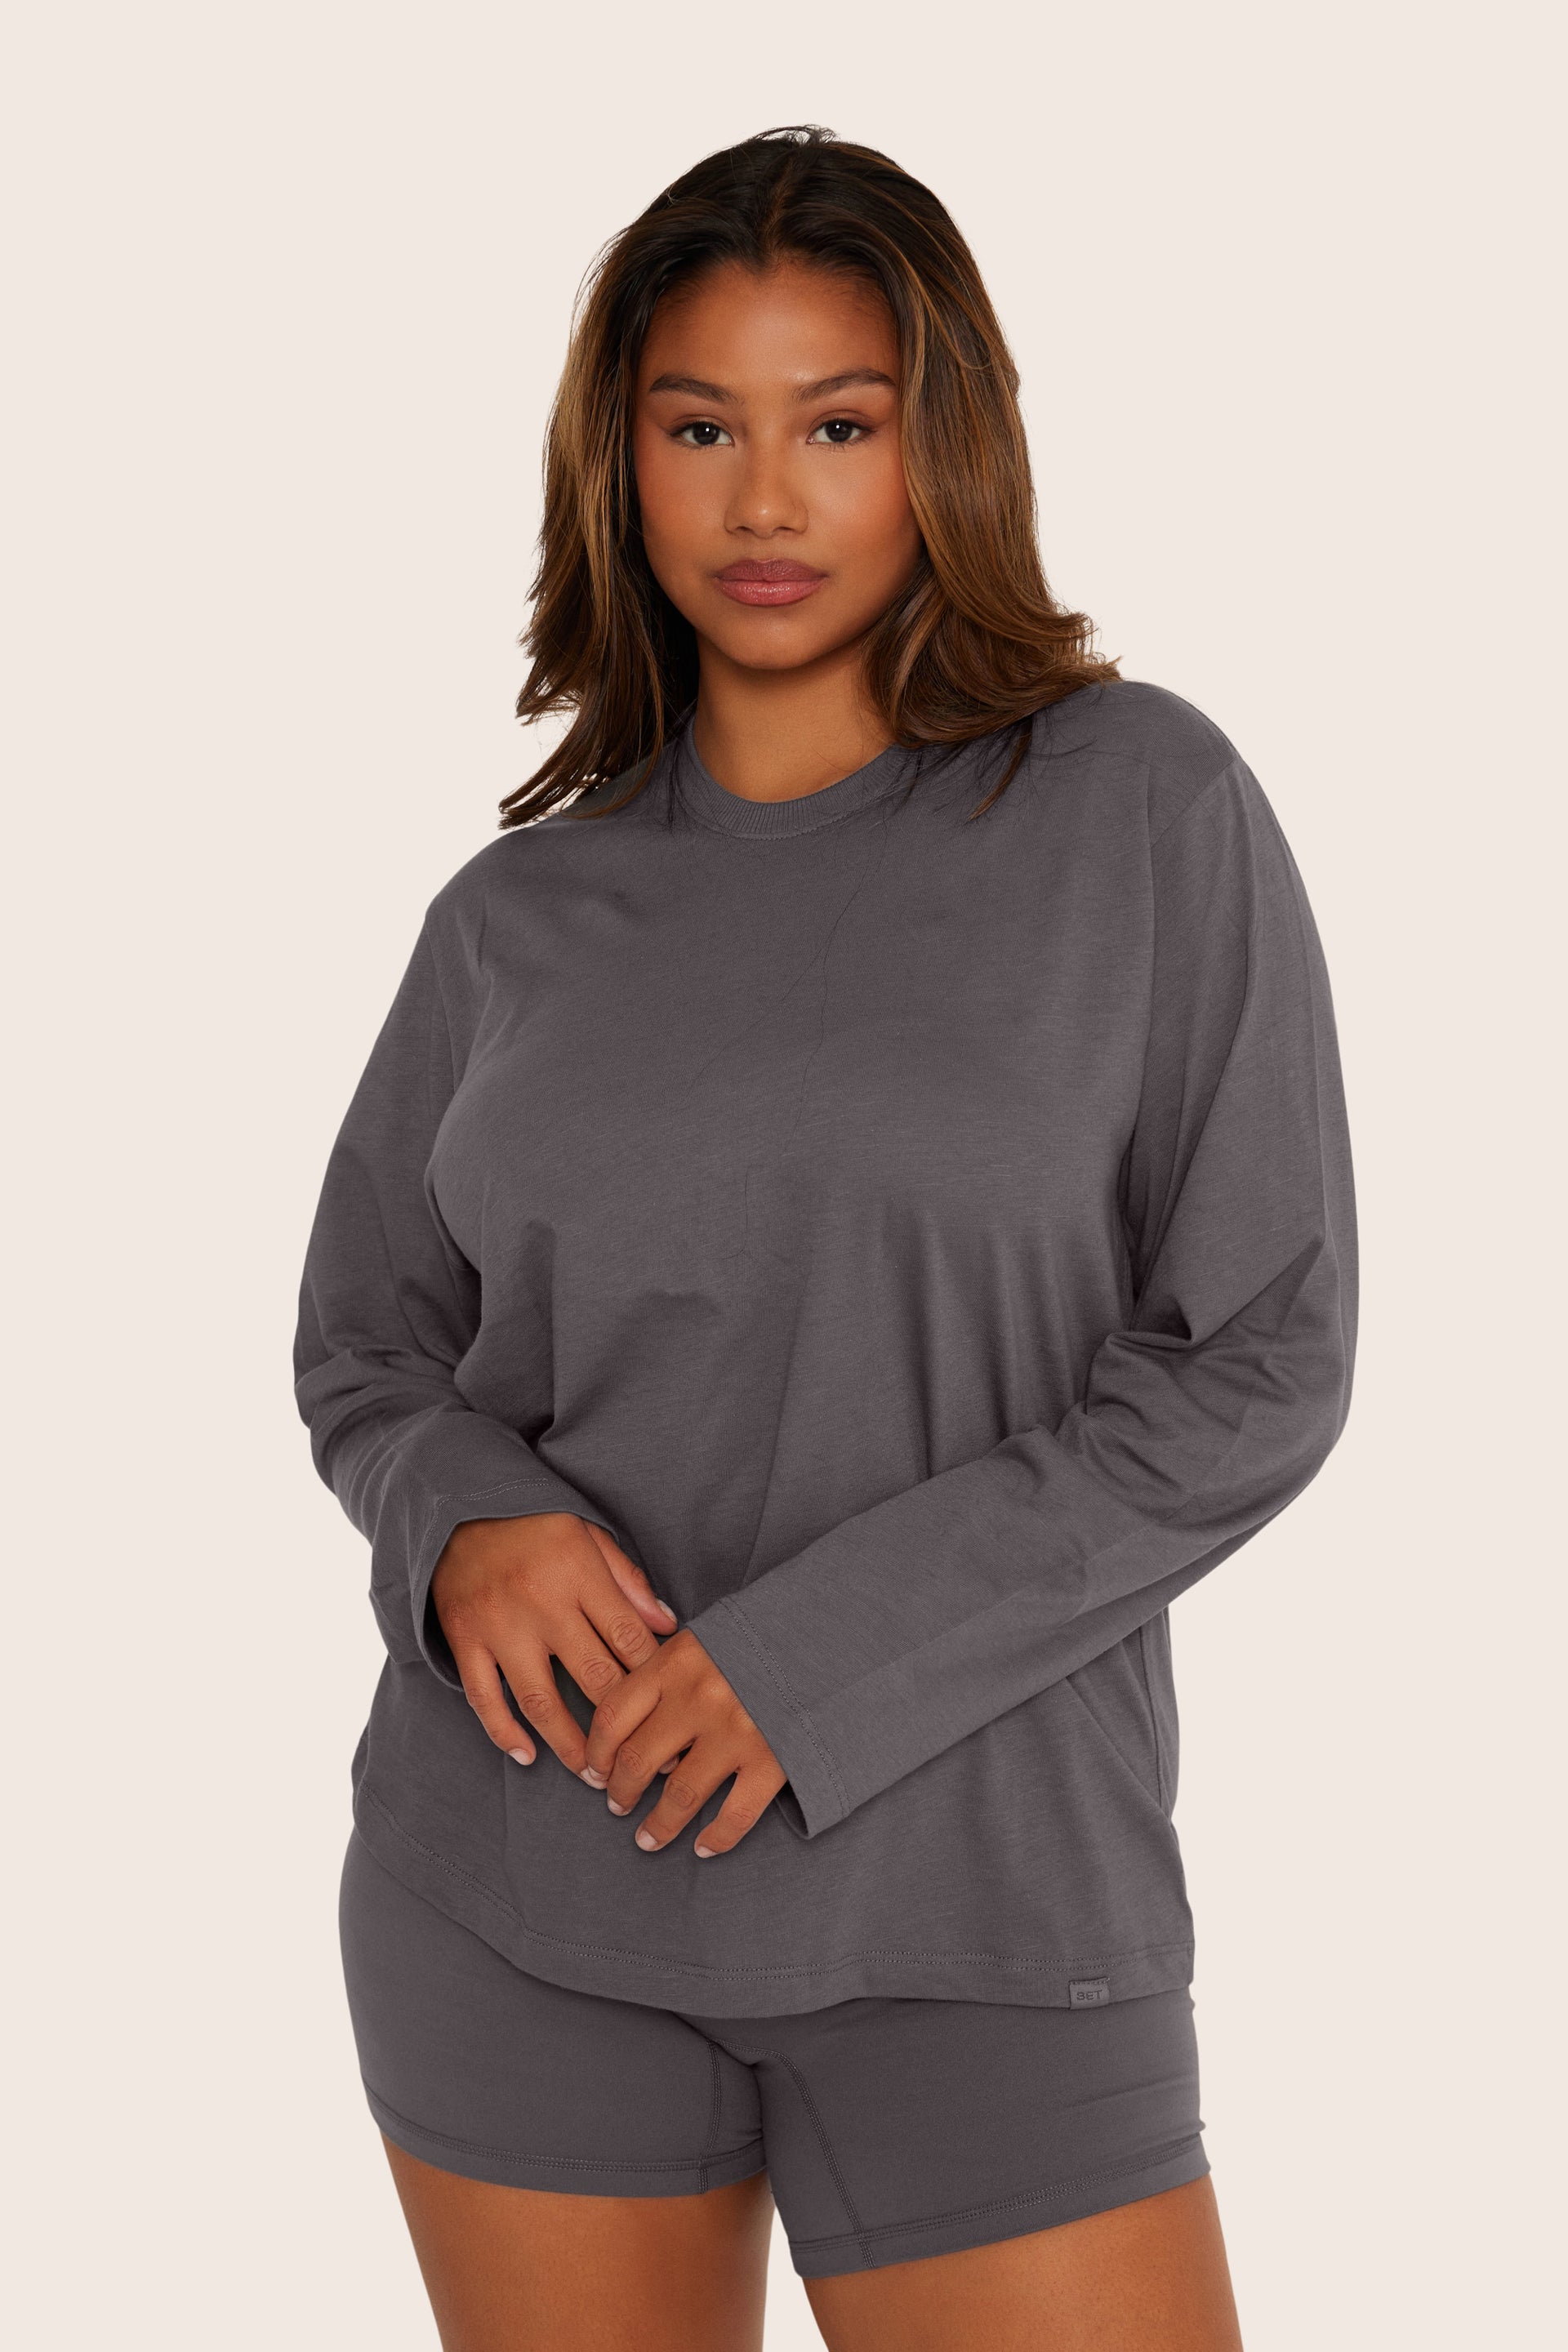 SET™ CLASSIC COTTON DAILY LONG SLEEVE IN GRAPHITE